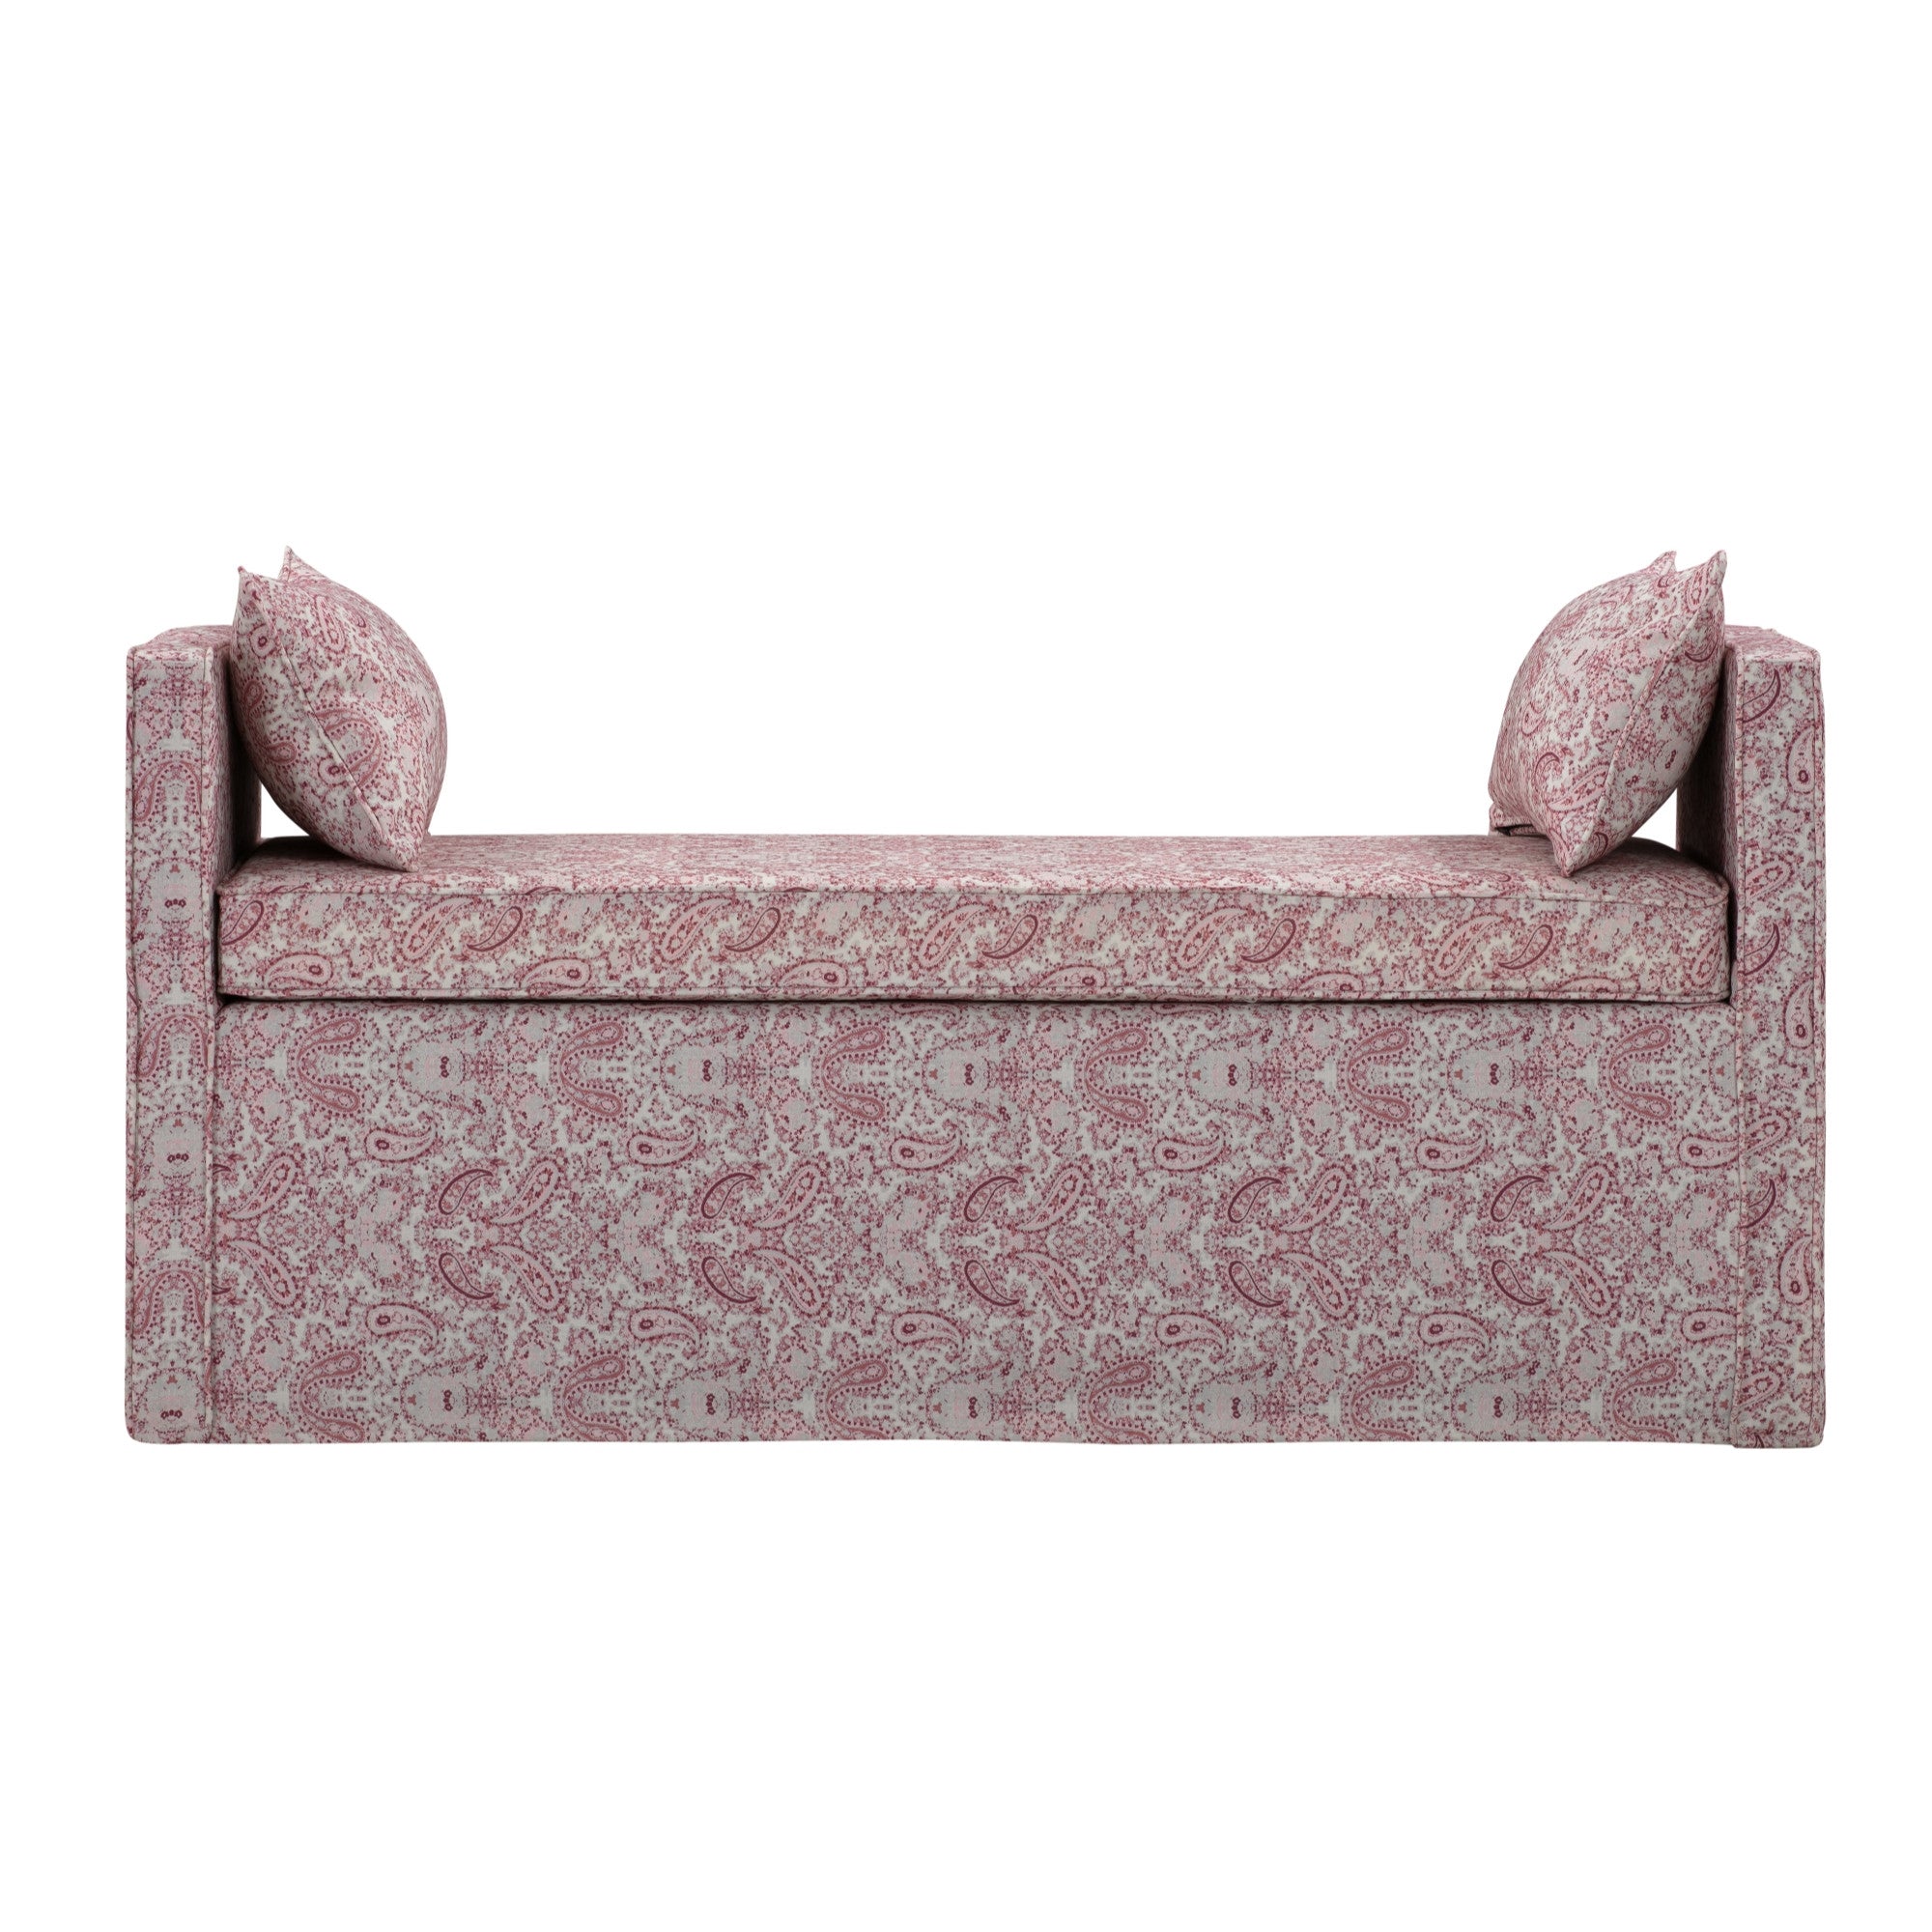 53" Red And Black Upholstered Linen Paisley Bench